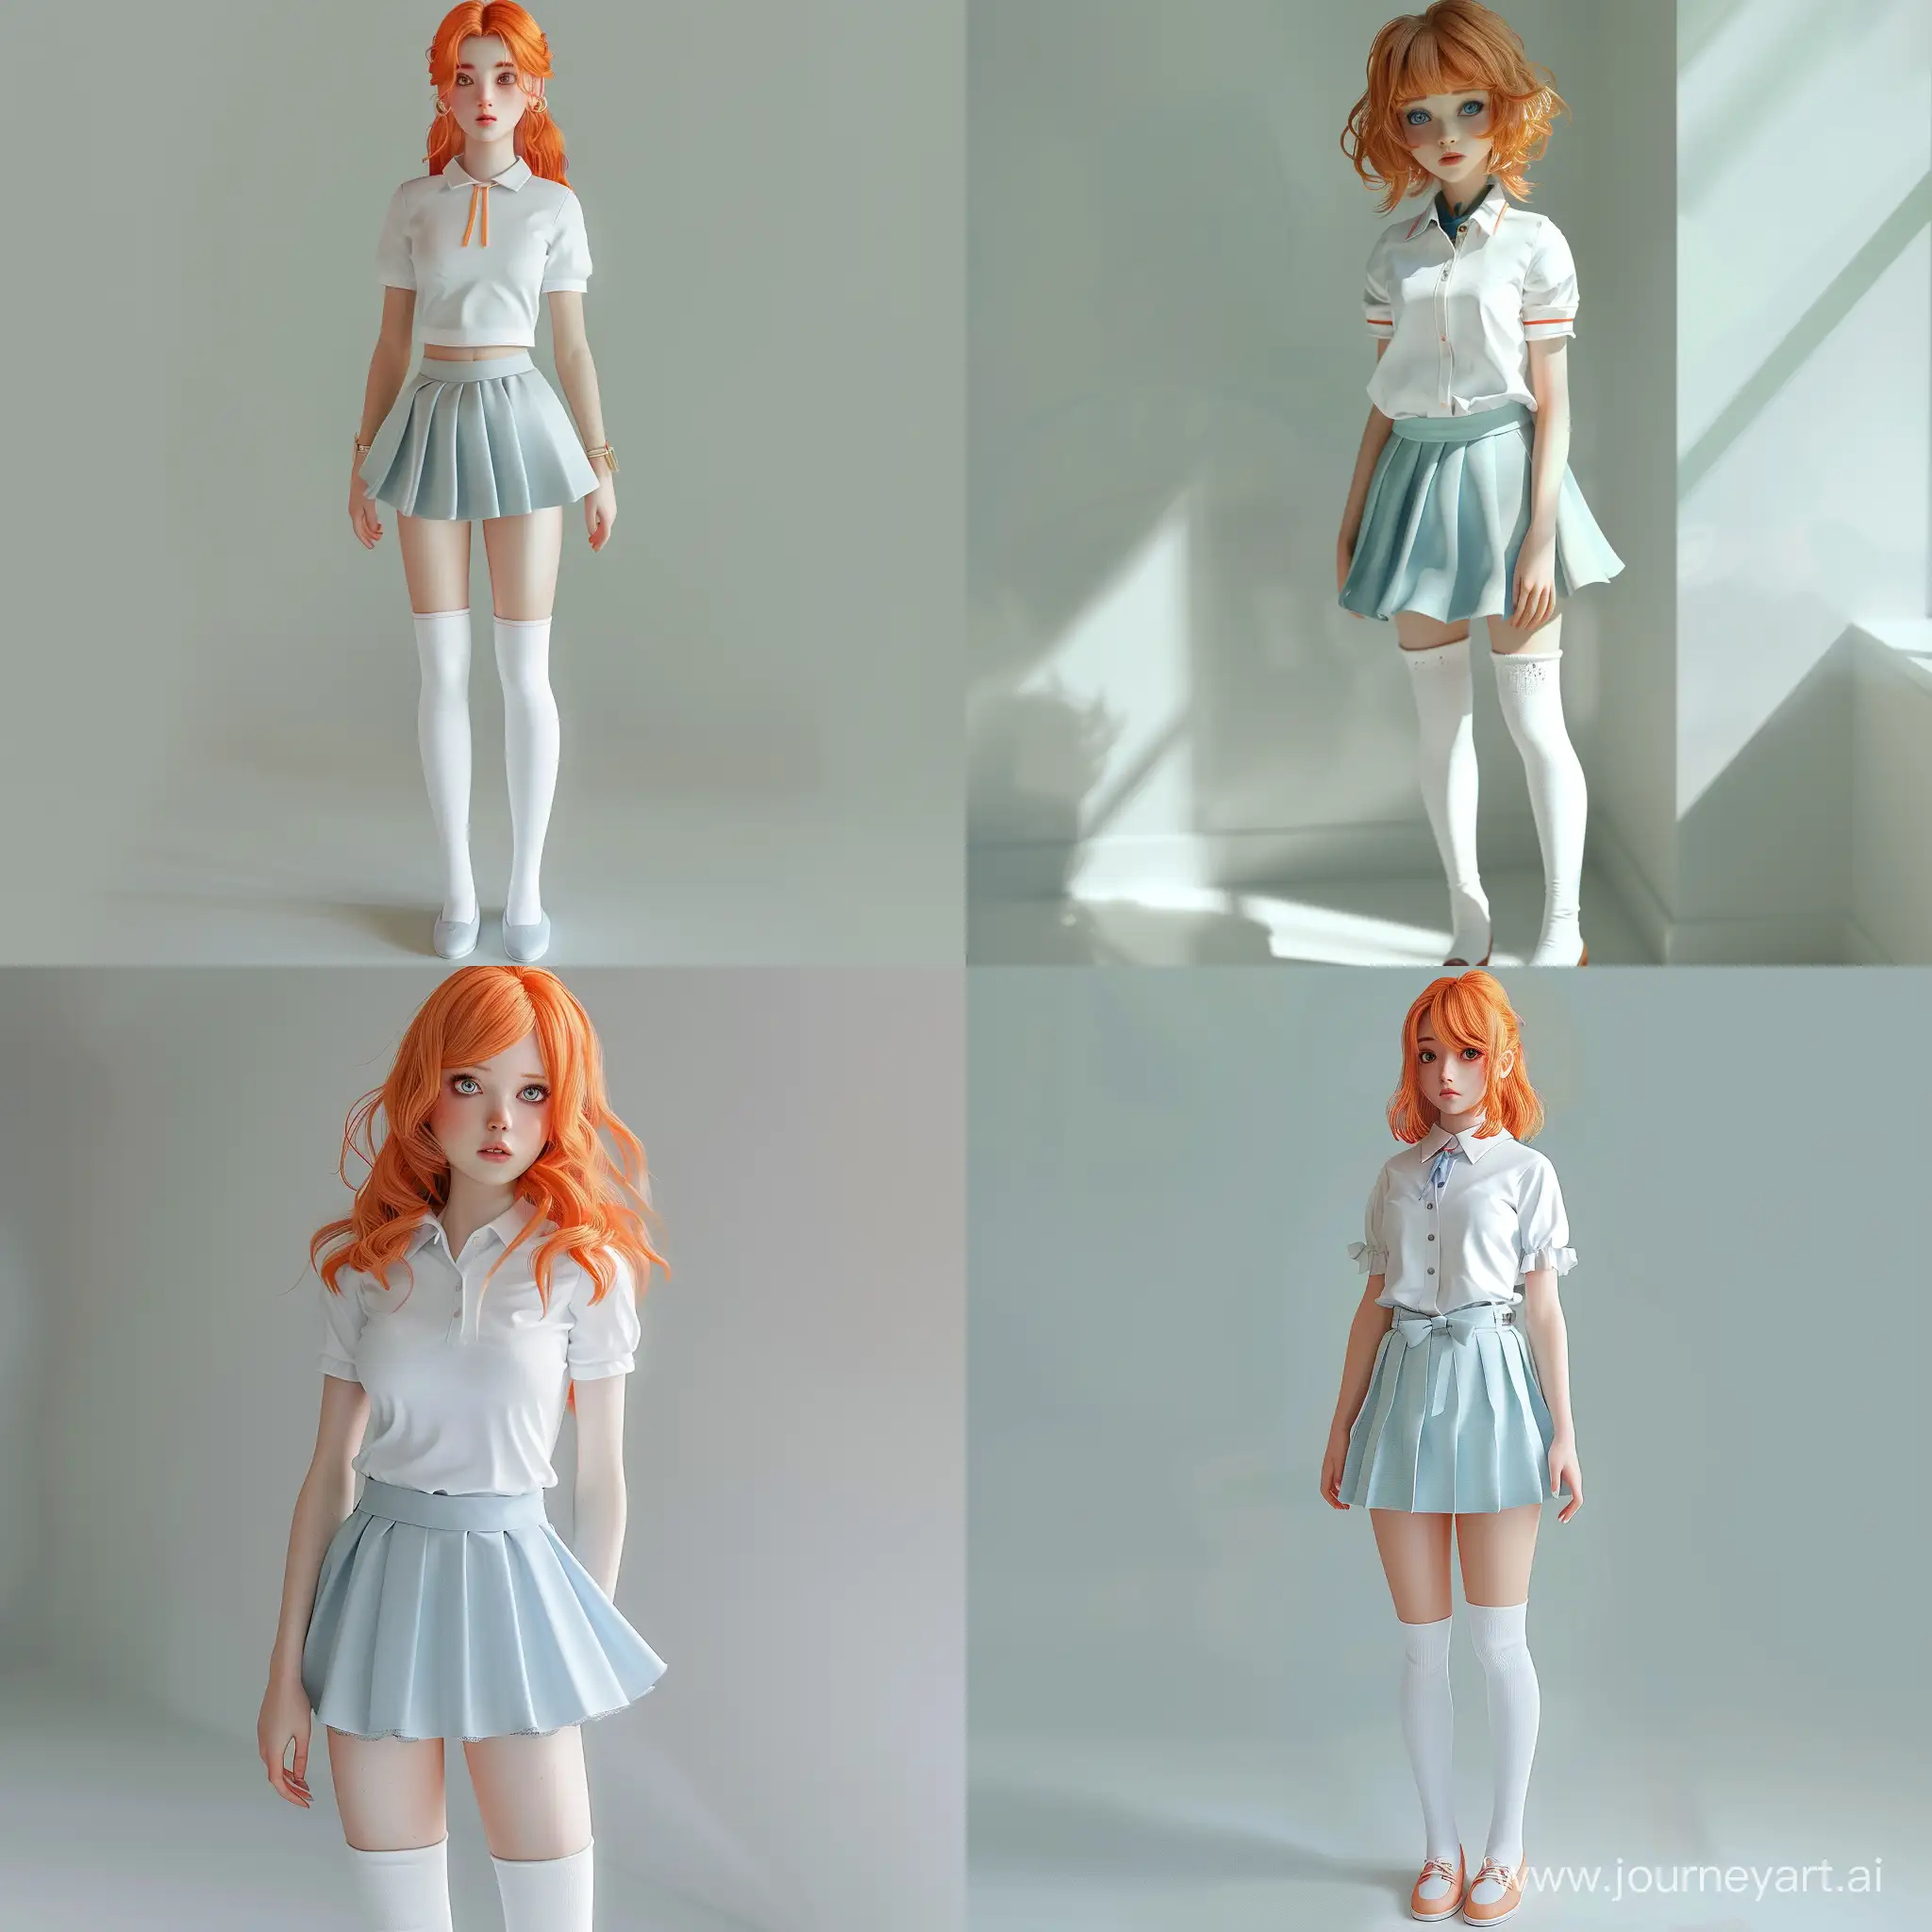 HyperRealistic-8K-Portrait-of-a-Charming-17YearOld-Girl-with-Orange-Hair-and-Playful-Attire